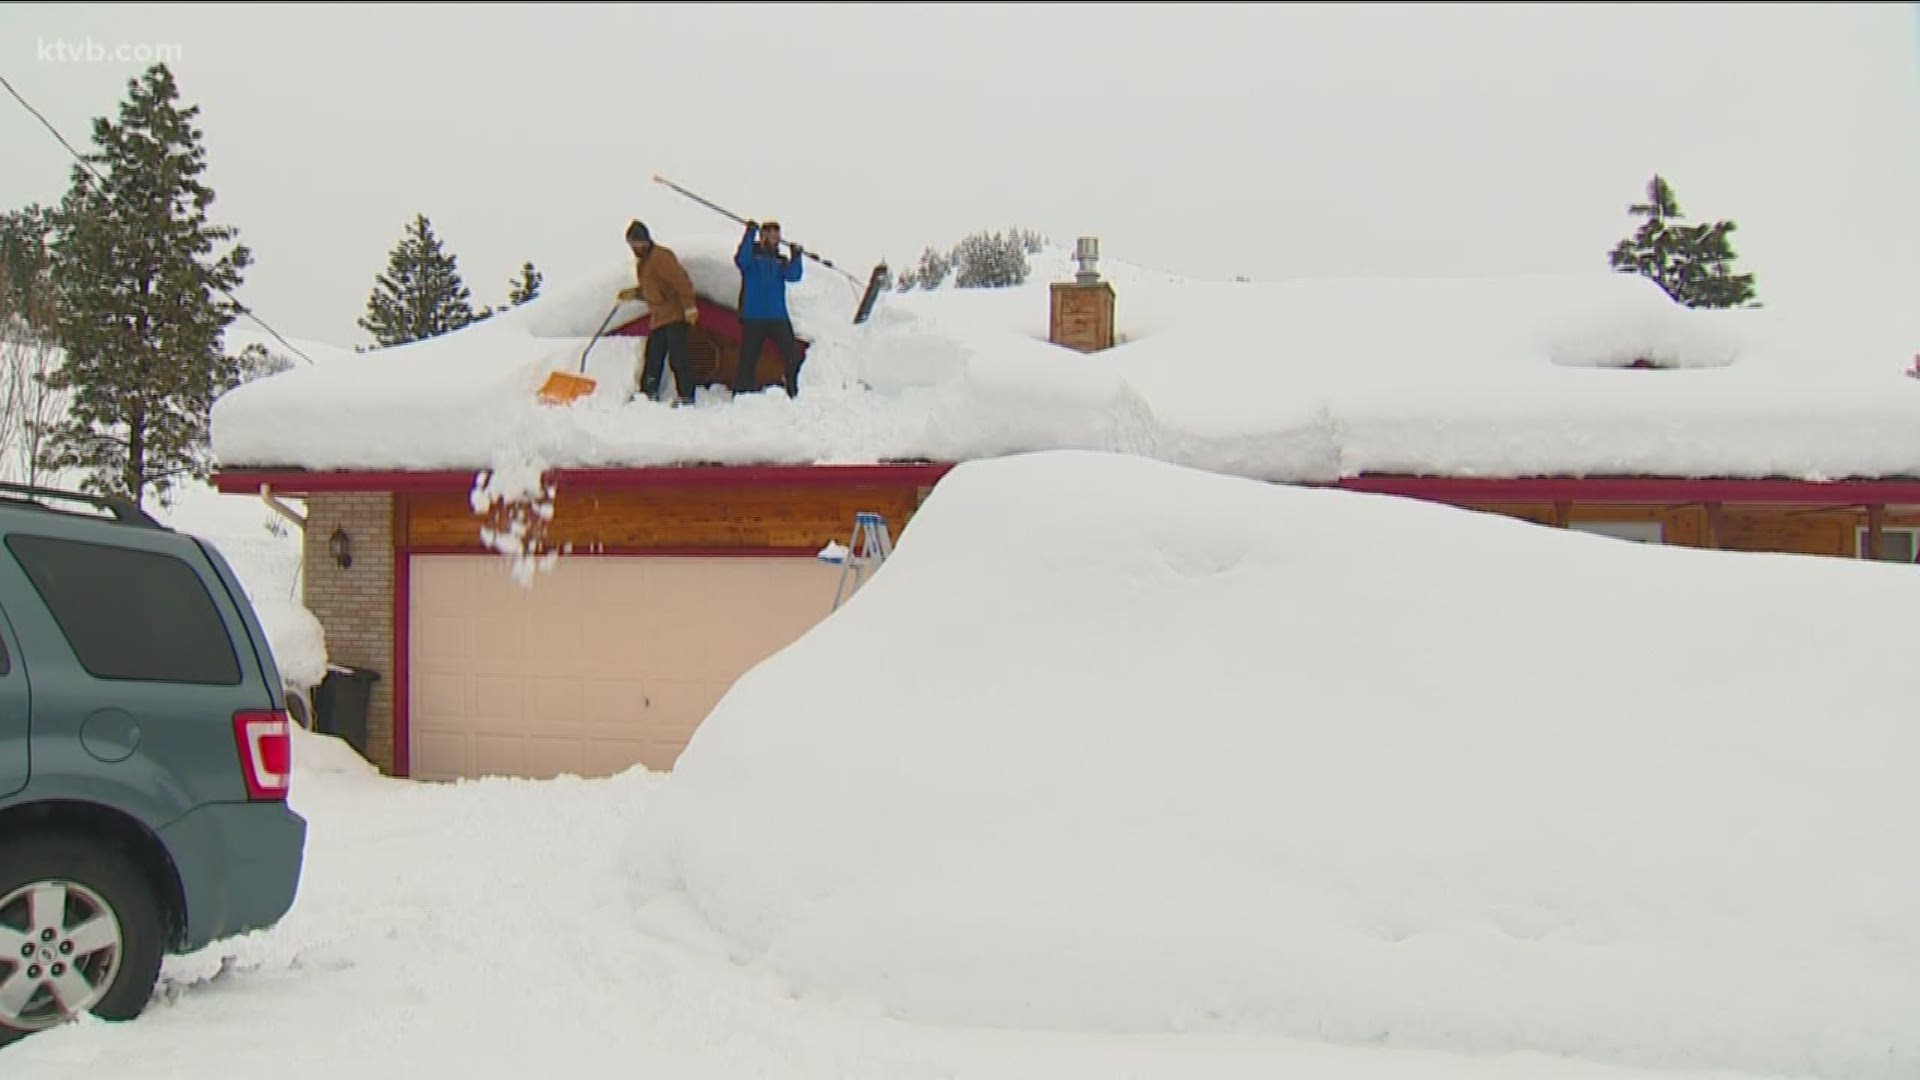 Snow in the Treasure Valley might be fun to play in, but in the Idaho mountains, the snow is causing issues for homeowners and drivers.